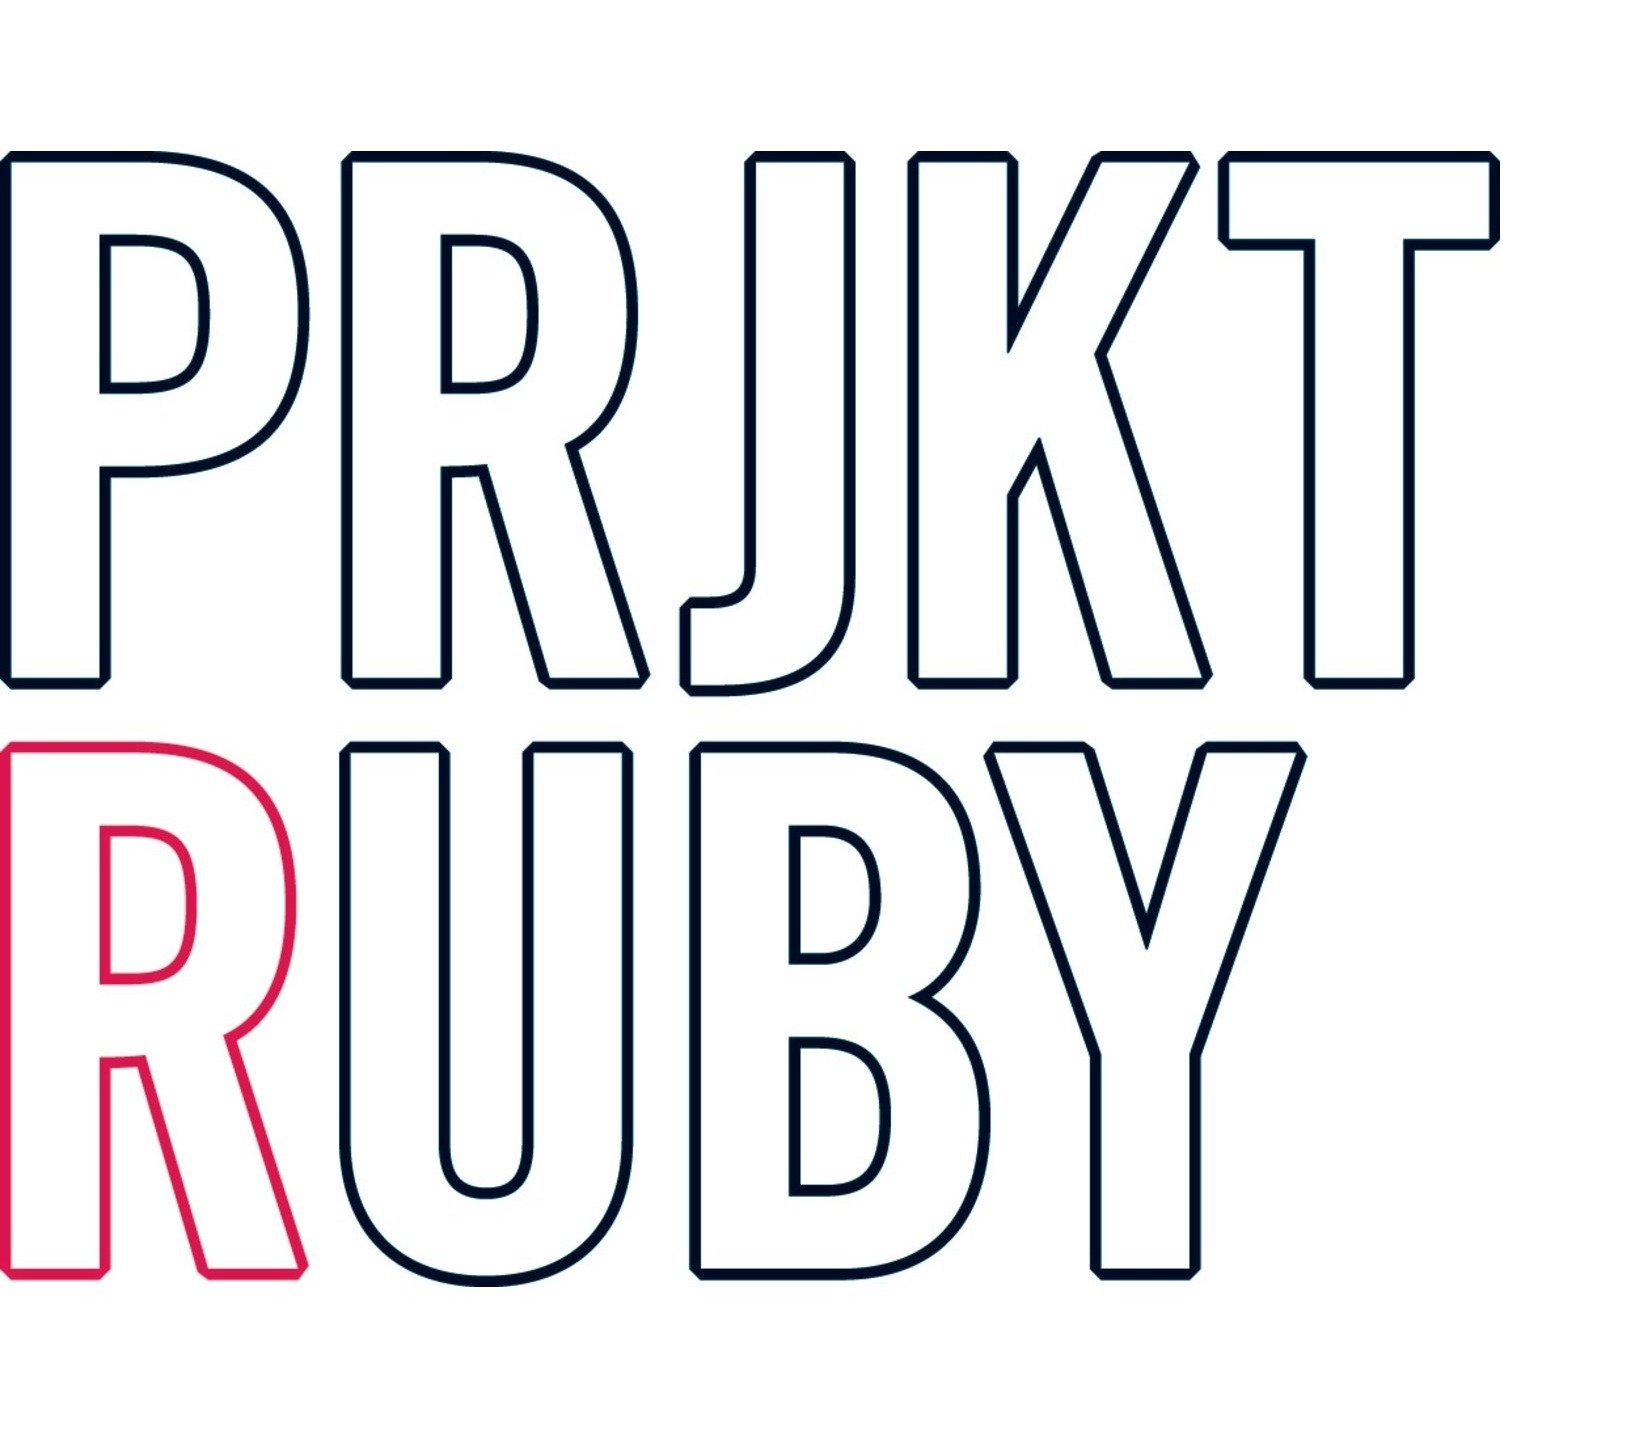 Prjkt Ruby coupon codes, promo codes and deals